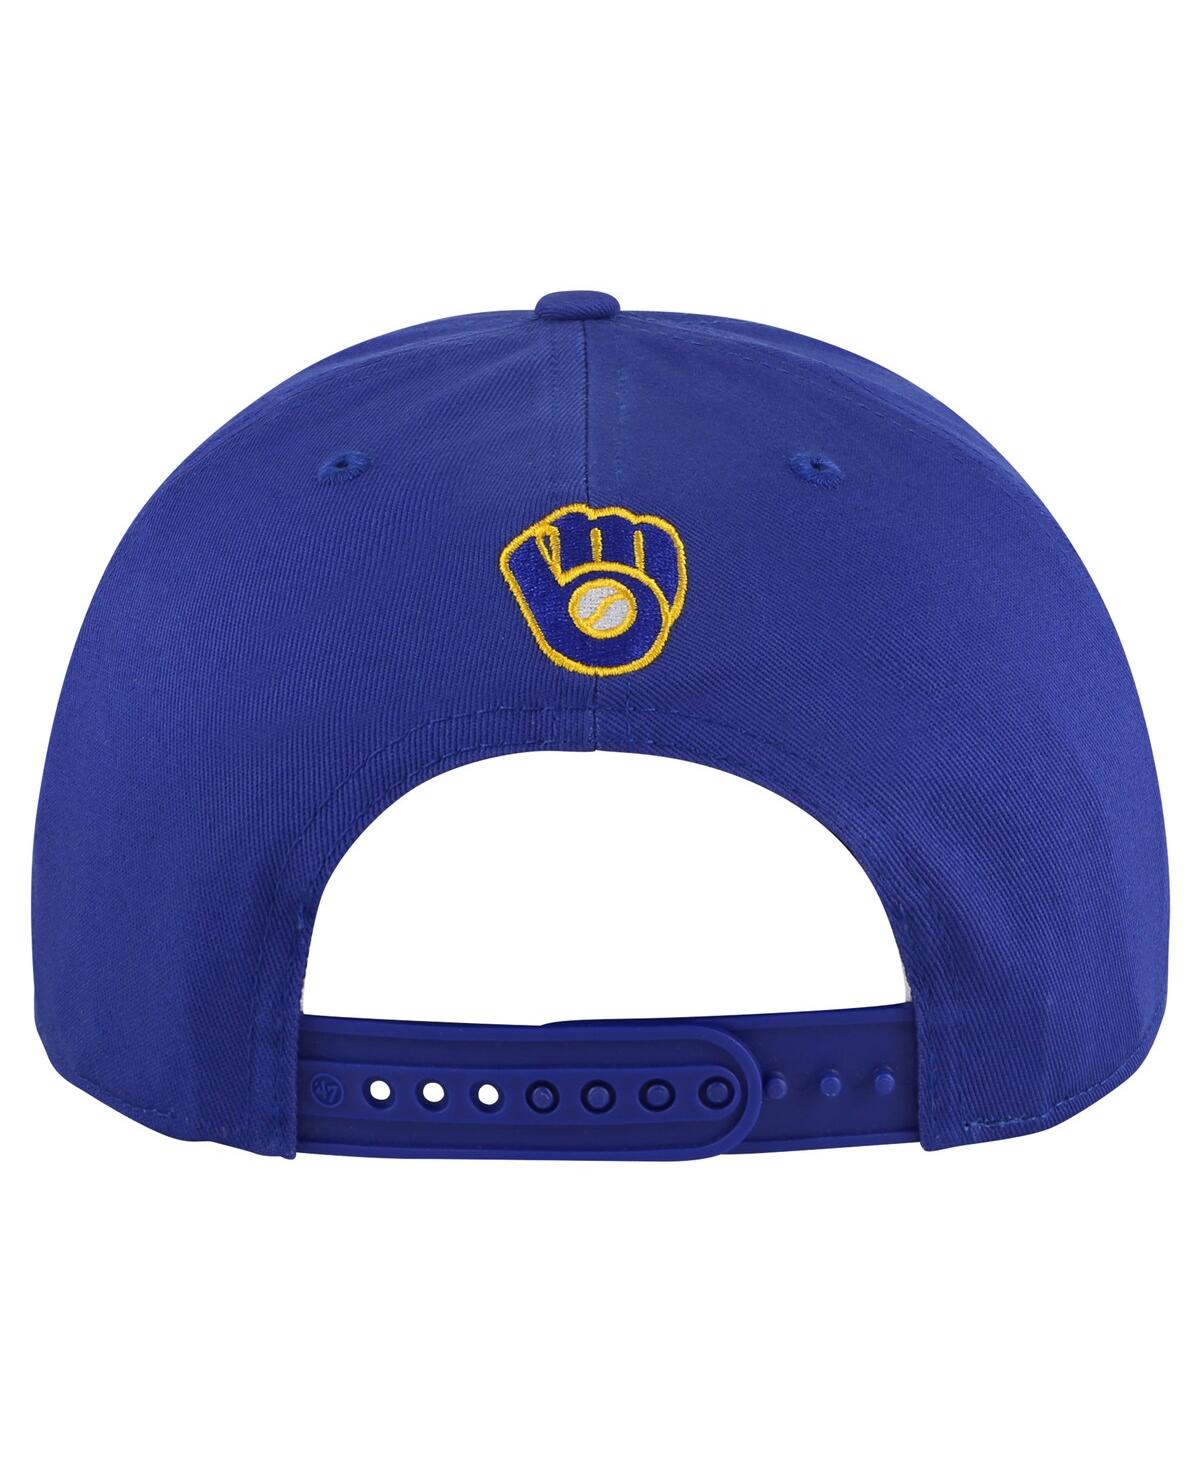 Shop 47 Brand Men's Royal Milwaukee Brewers Wax Pack Collection Premier Hitch Adjustable Hat